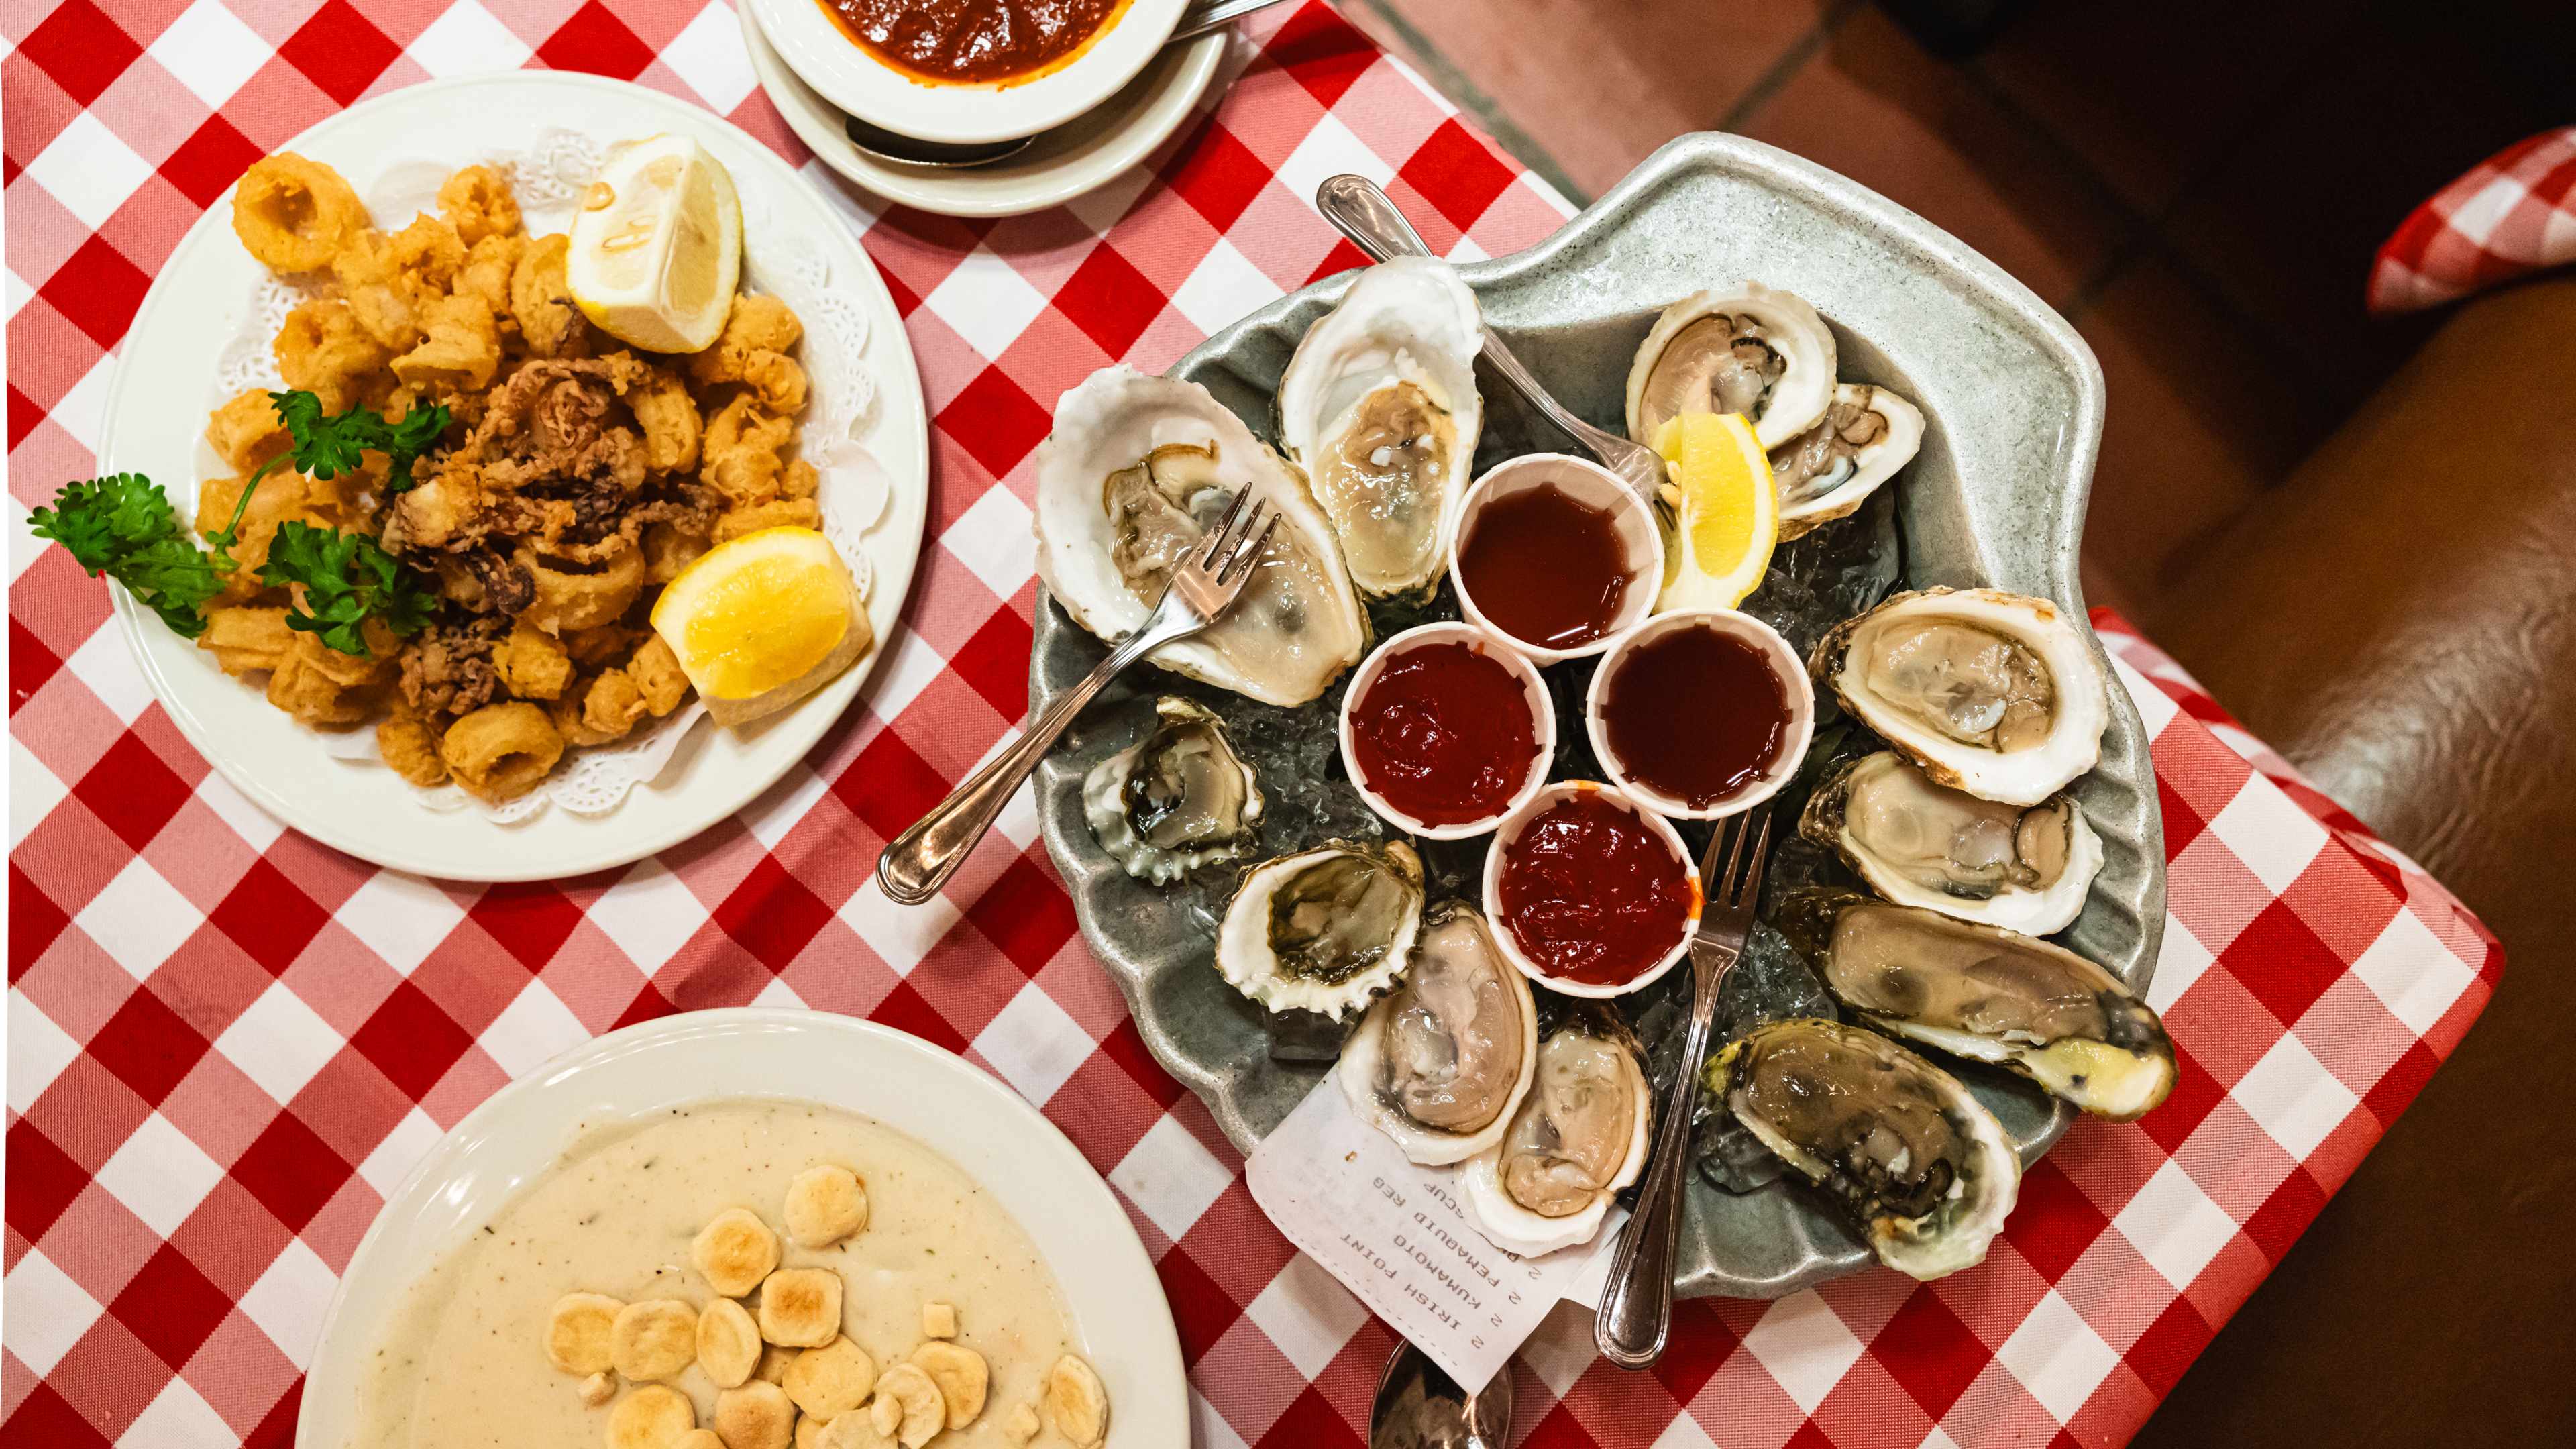 A spread at Grand Central Oyster Bar.